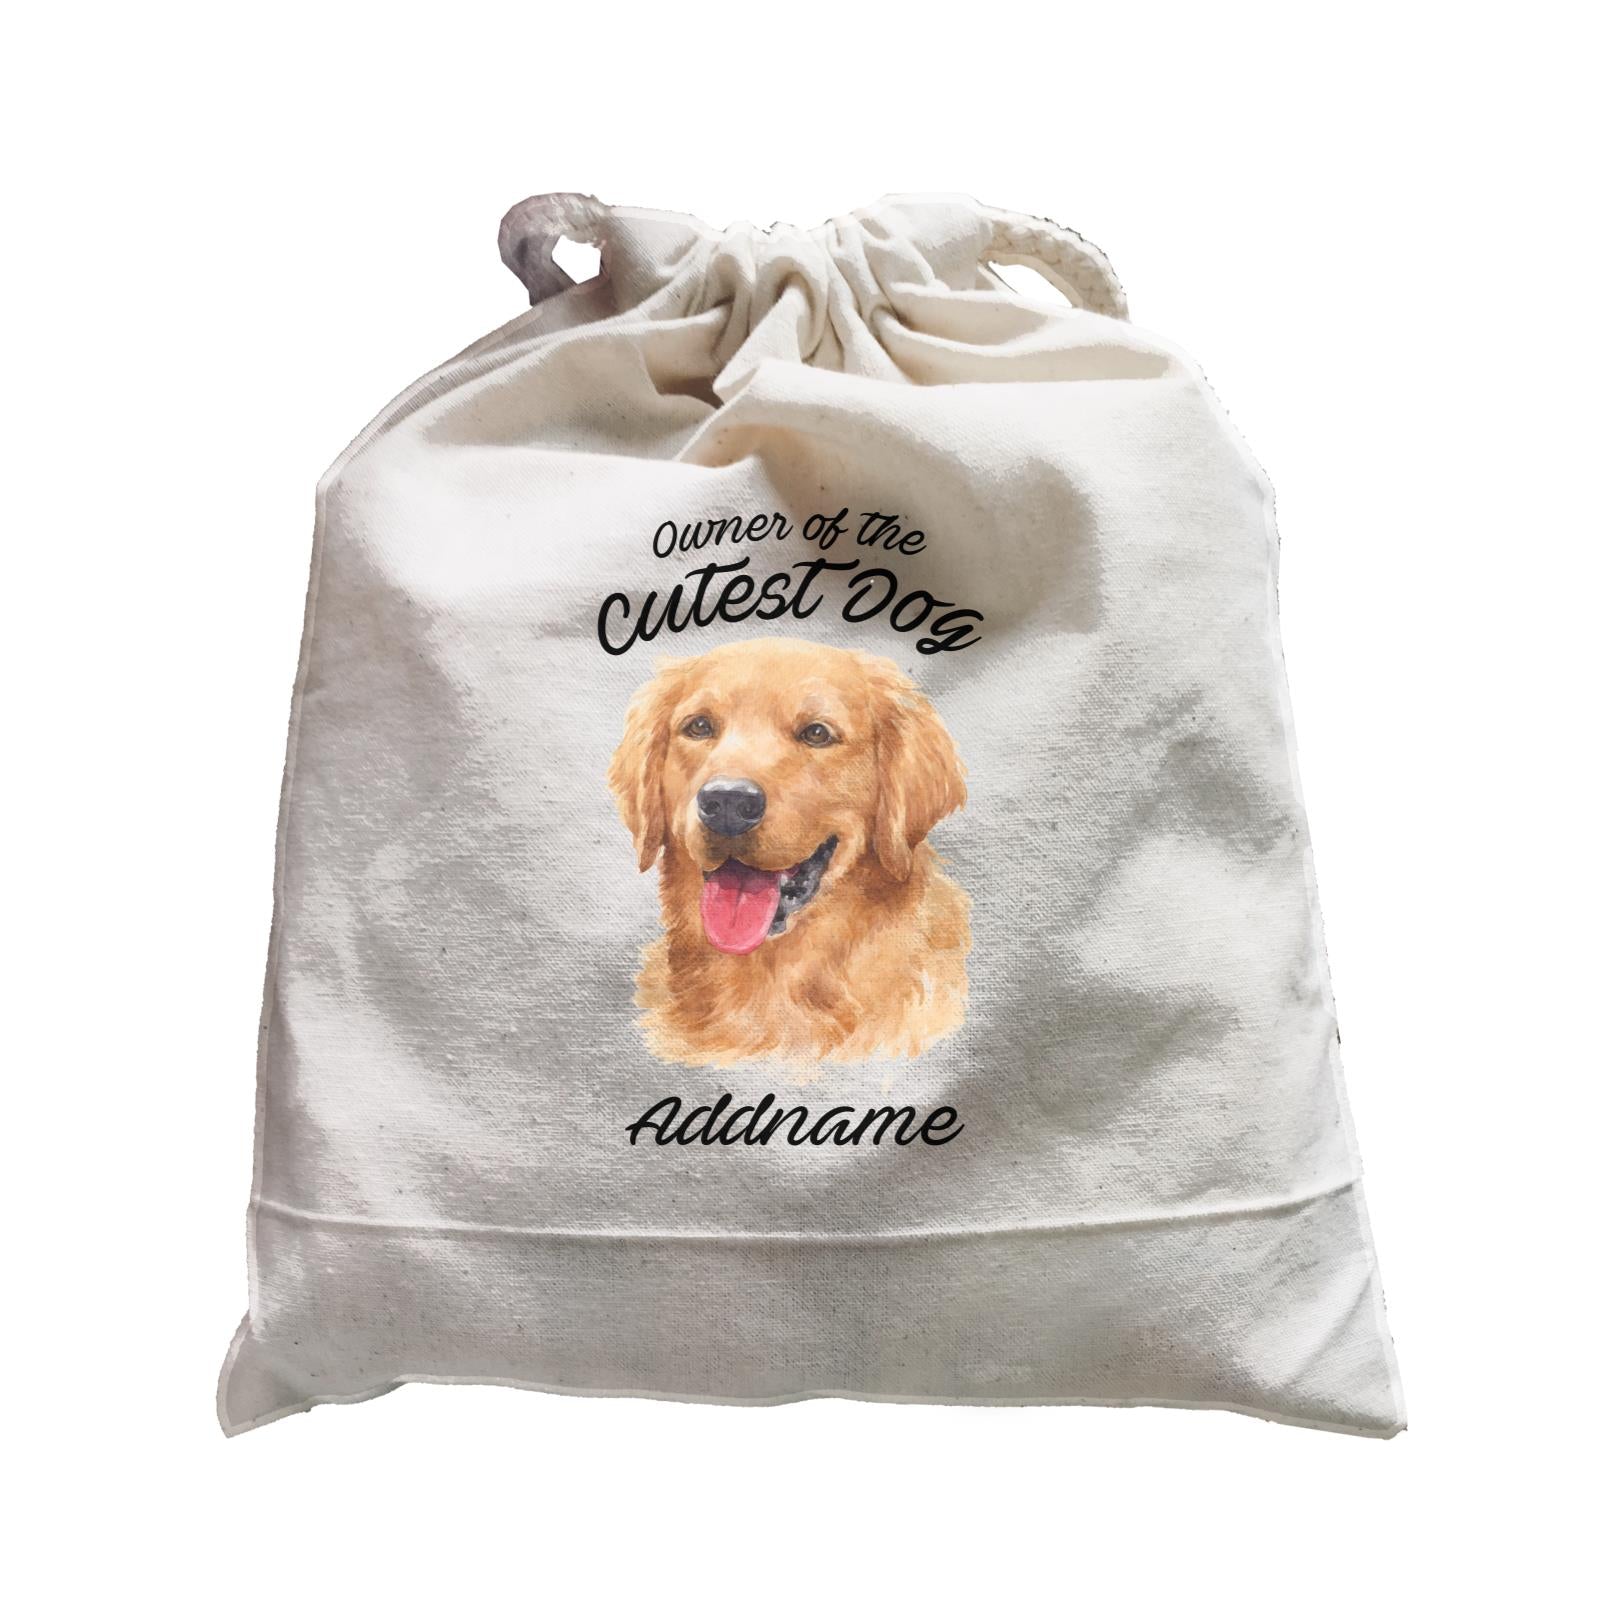 Watercolor Dog Owner Of The Cutest Dog Golden Retriever Addname Satchel